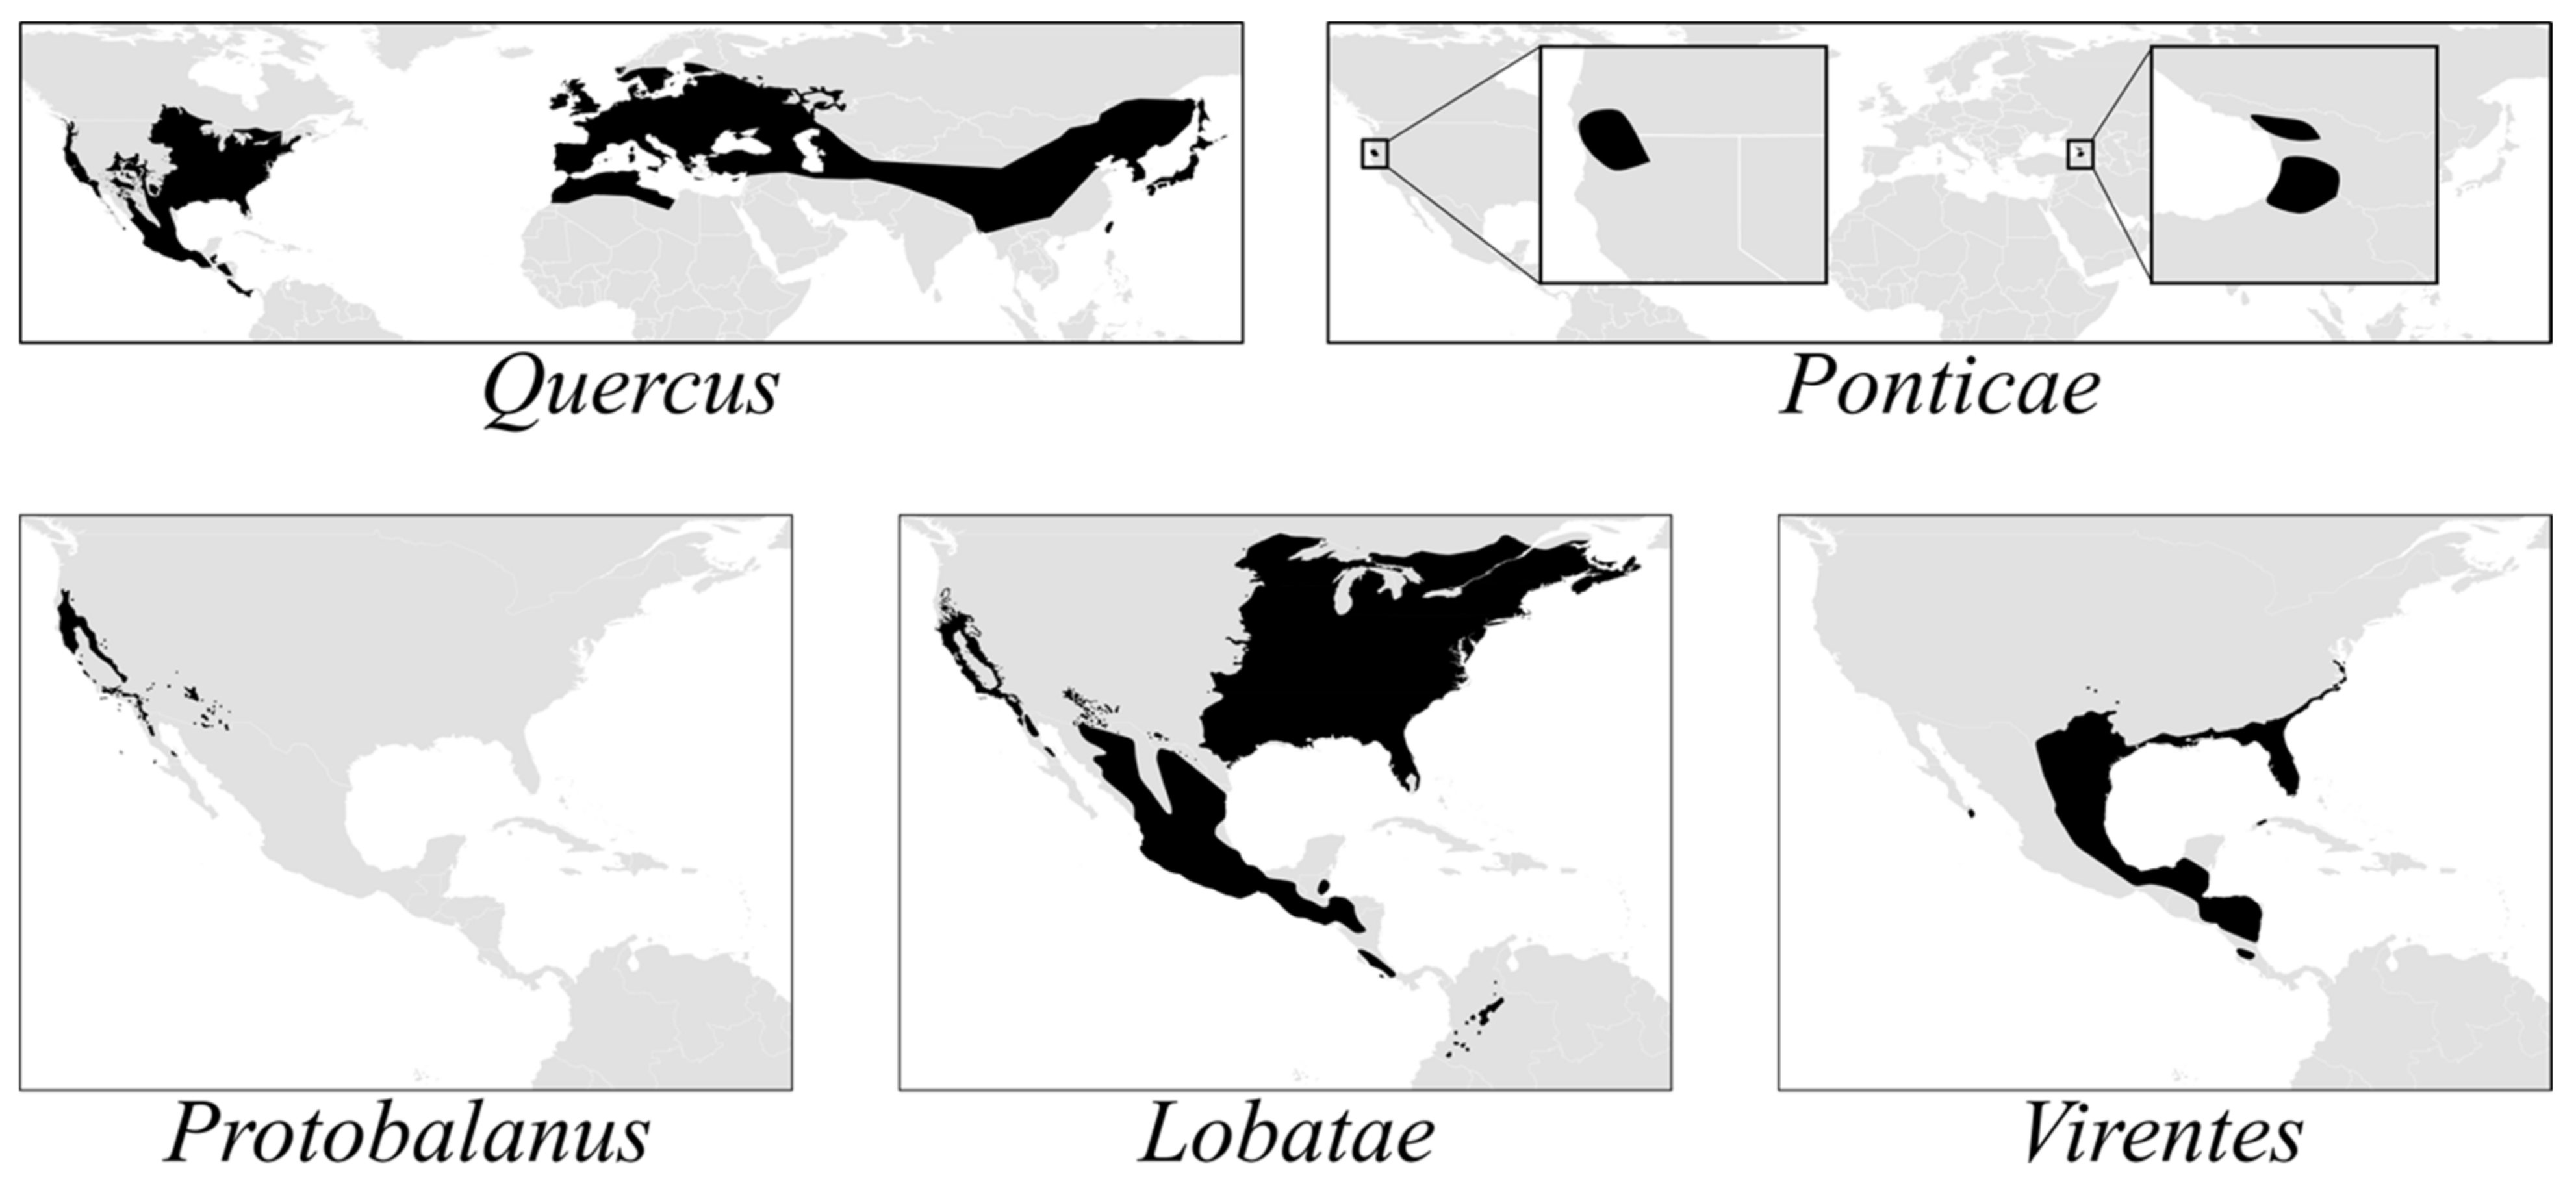 The global biogeography of tree leaf form and habit